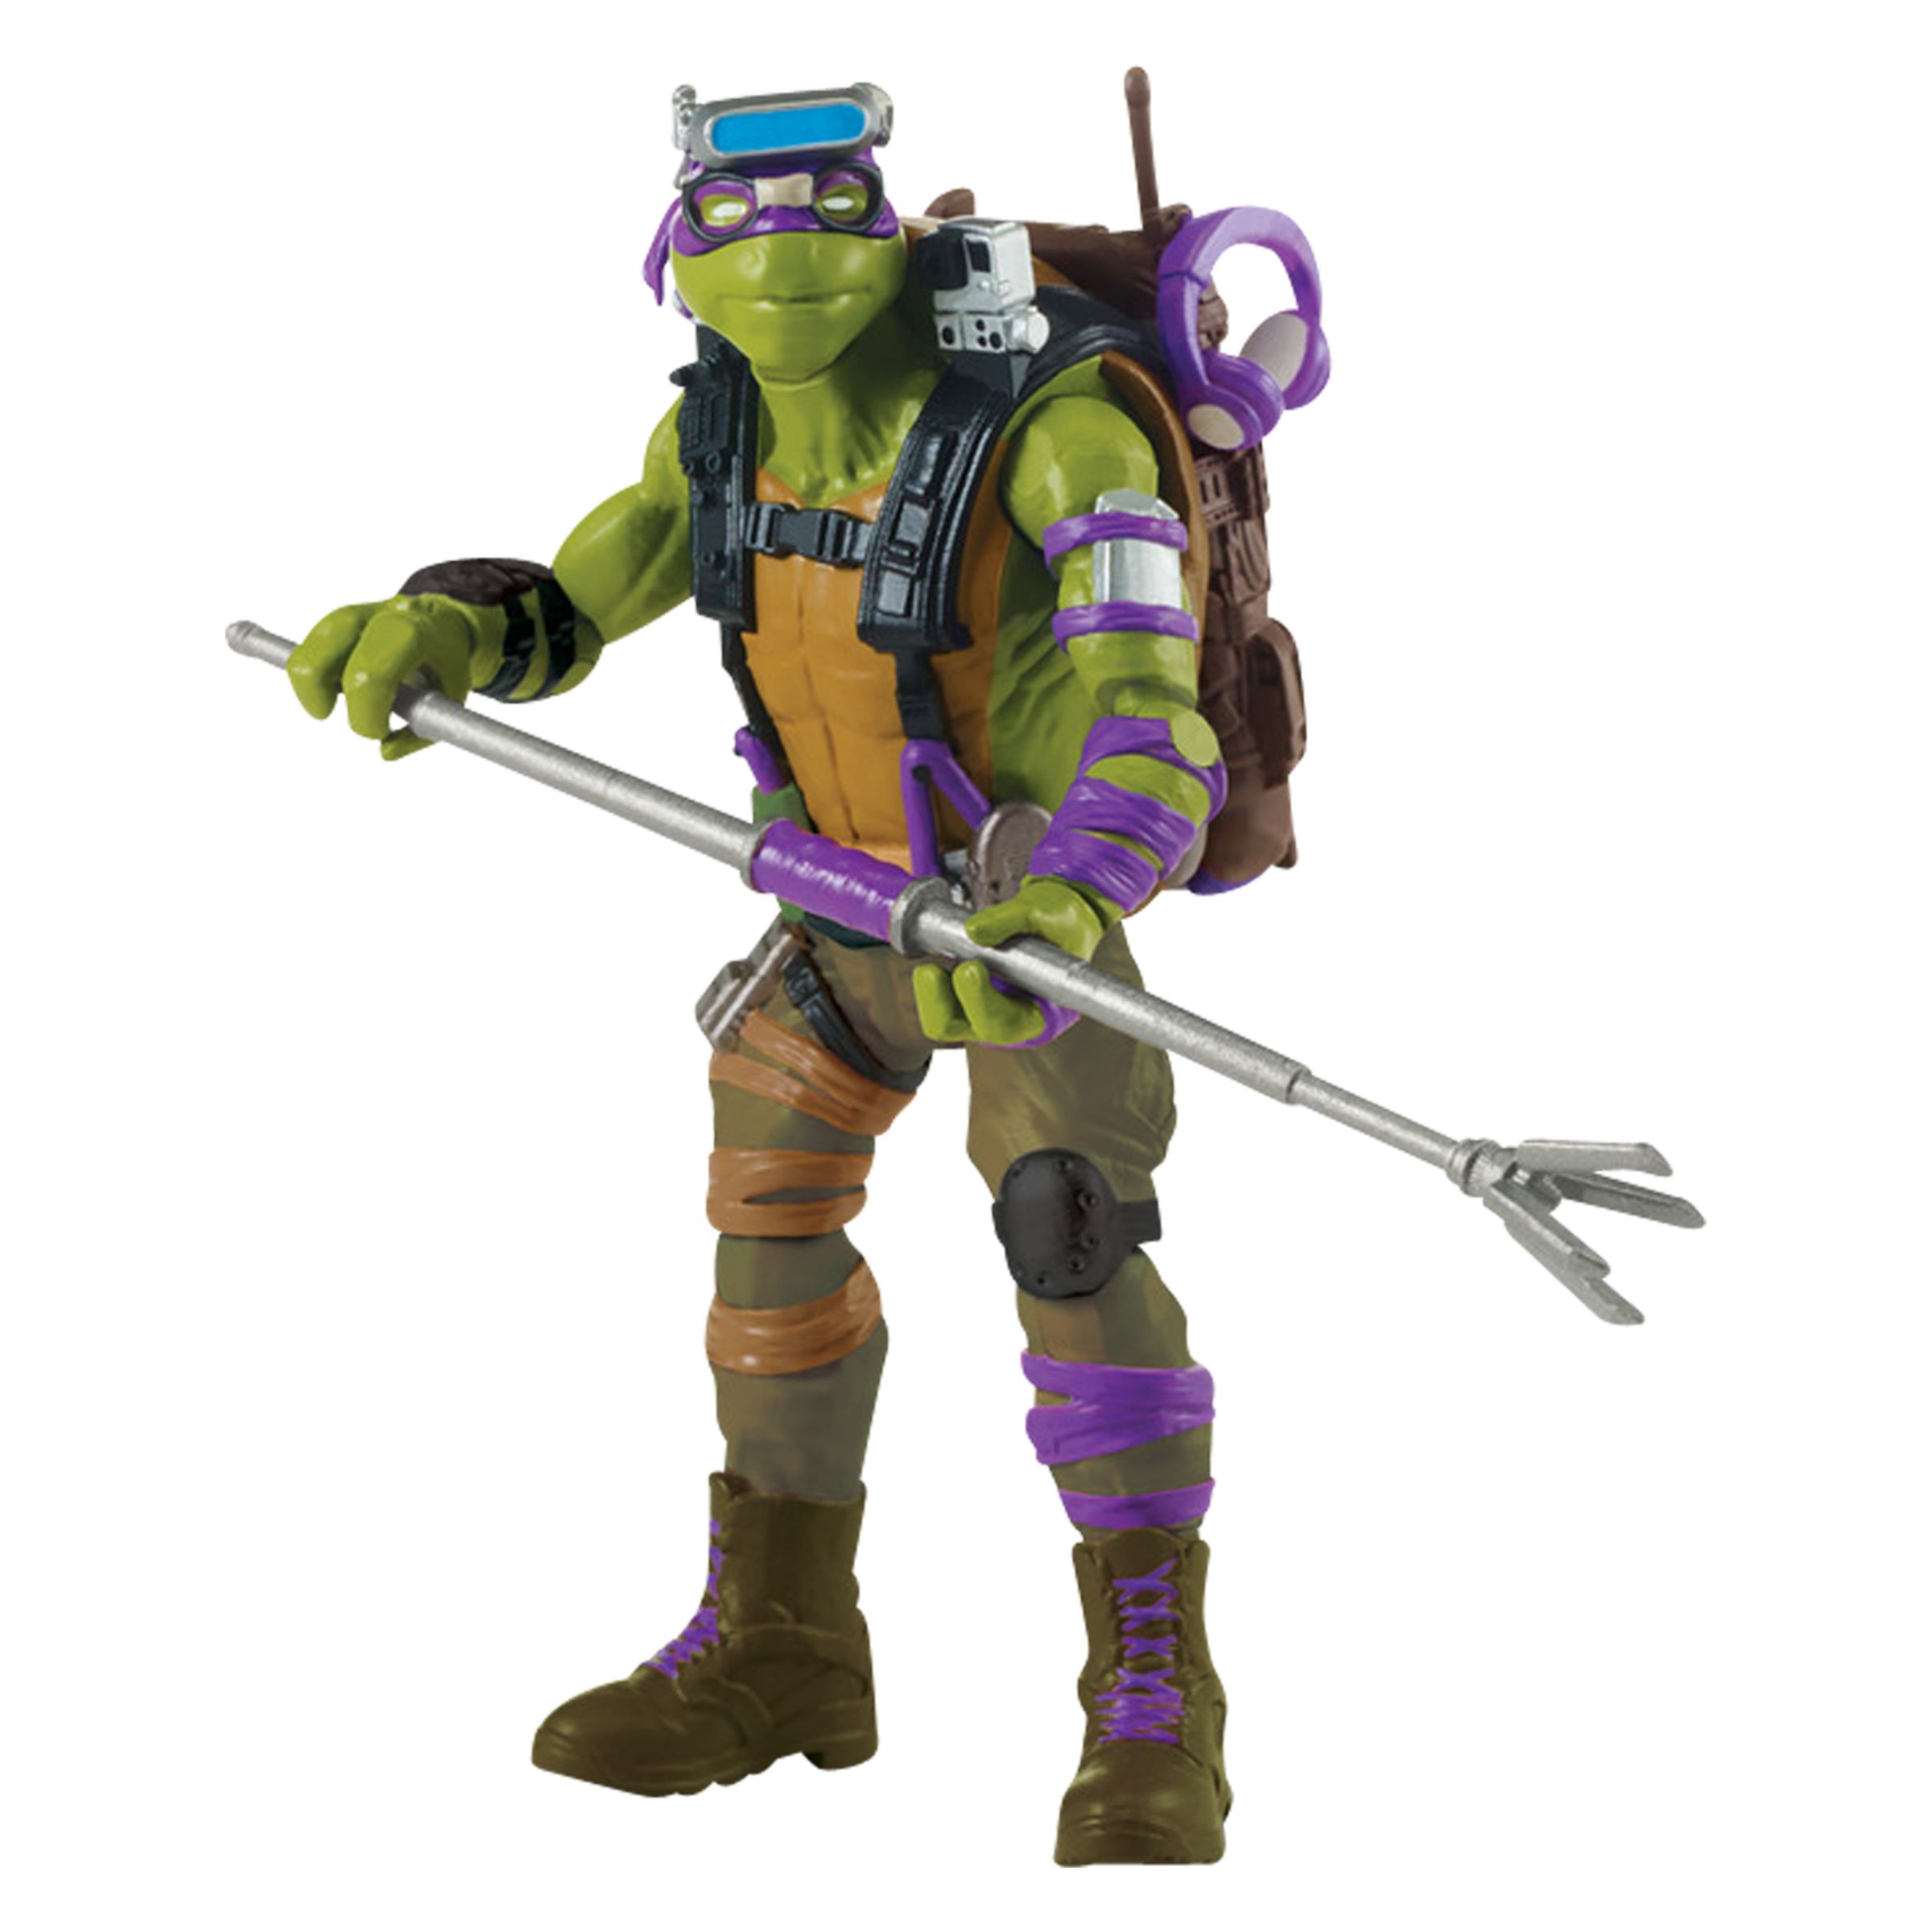 Teenage Mutant Ninja Turtles 2 Out Of The Shadows Donnie Action Figure At John Lewis Partners